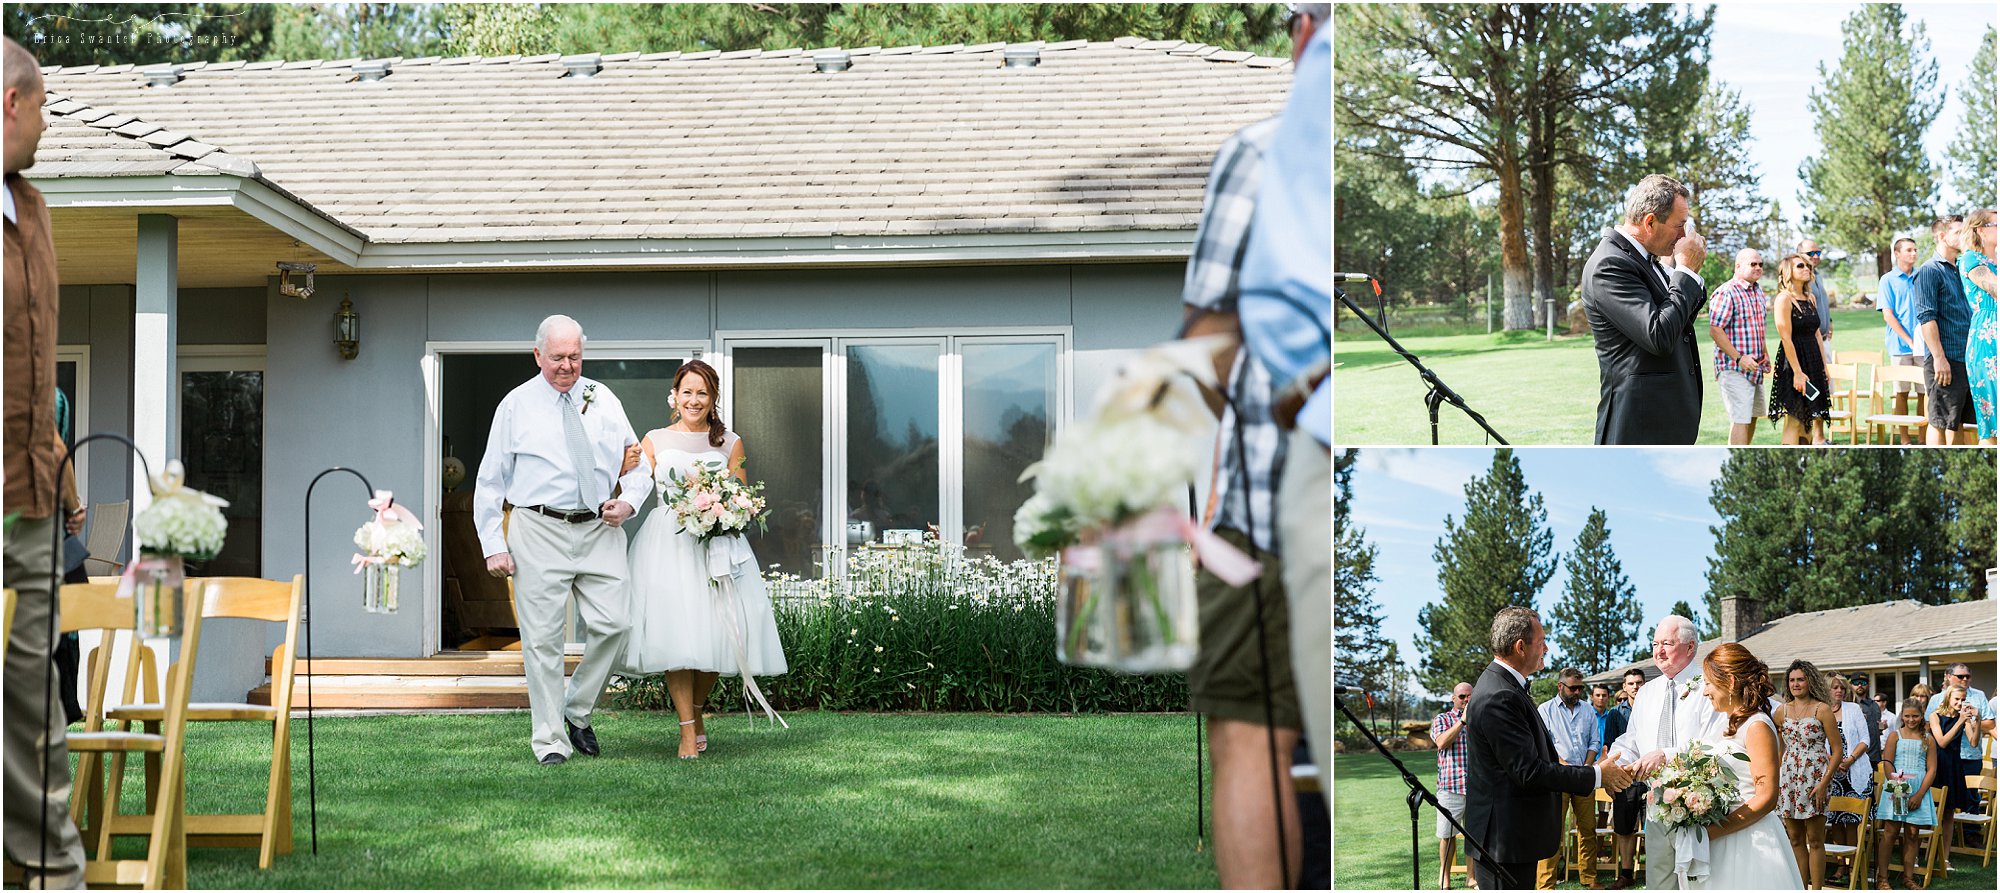 A bride is escorted down the aisle towards her groom at this Sisters, OR backyard wedding. | Erica Swantek Photography